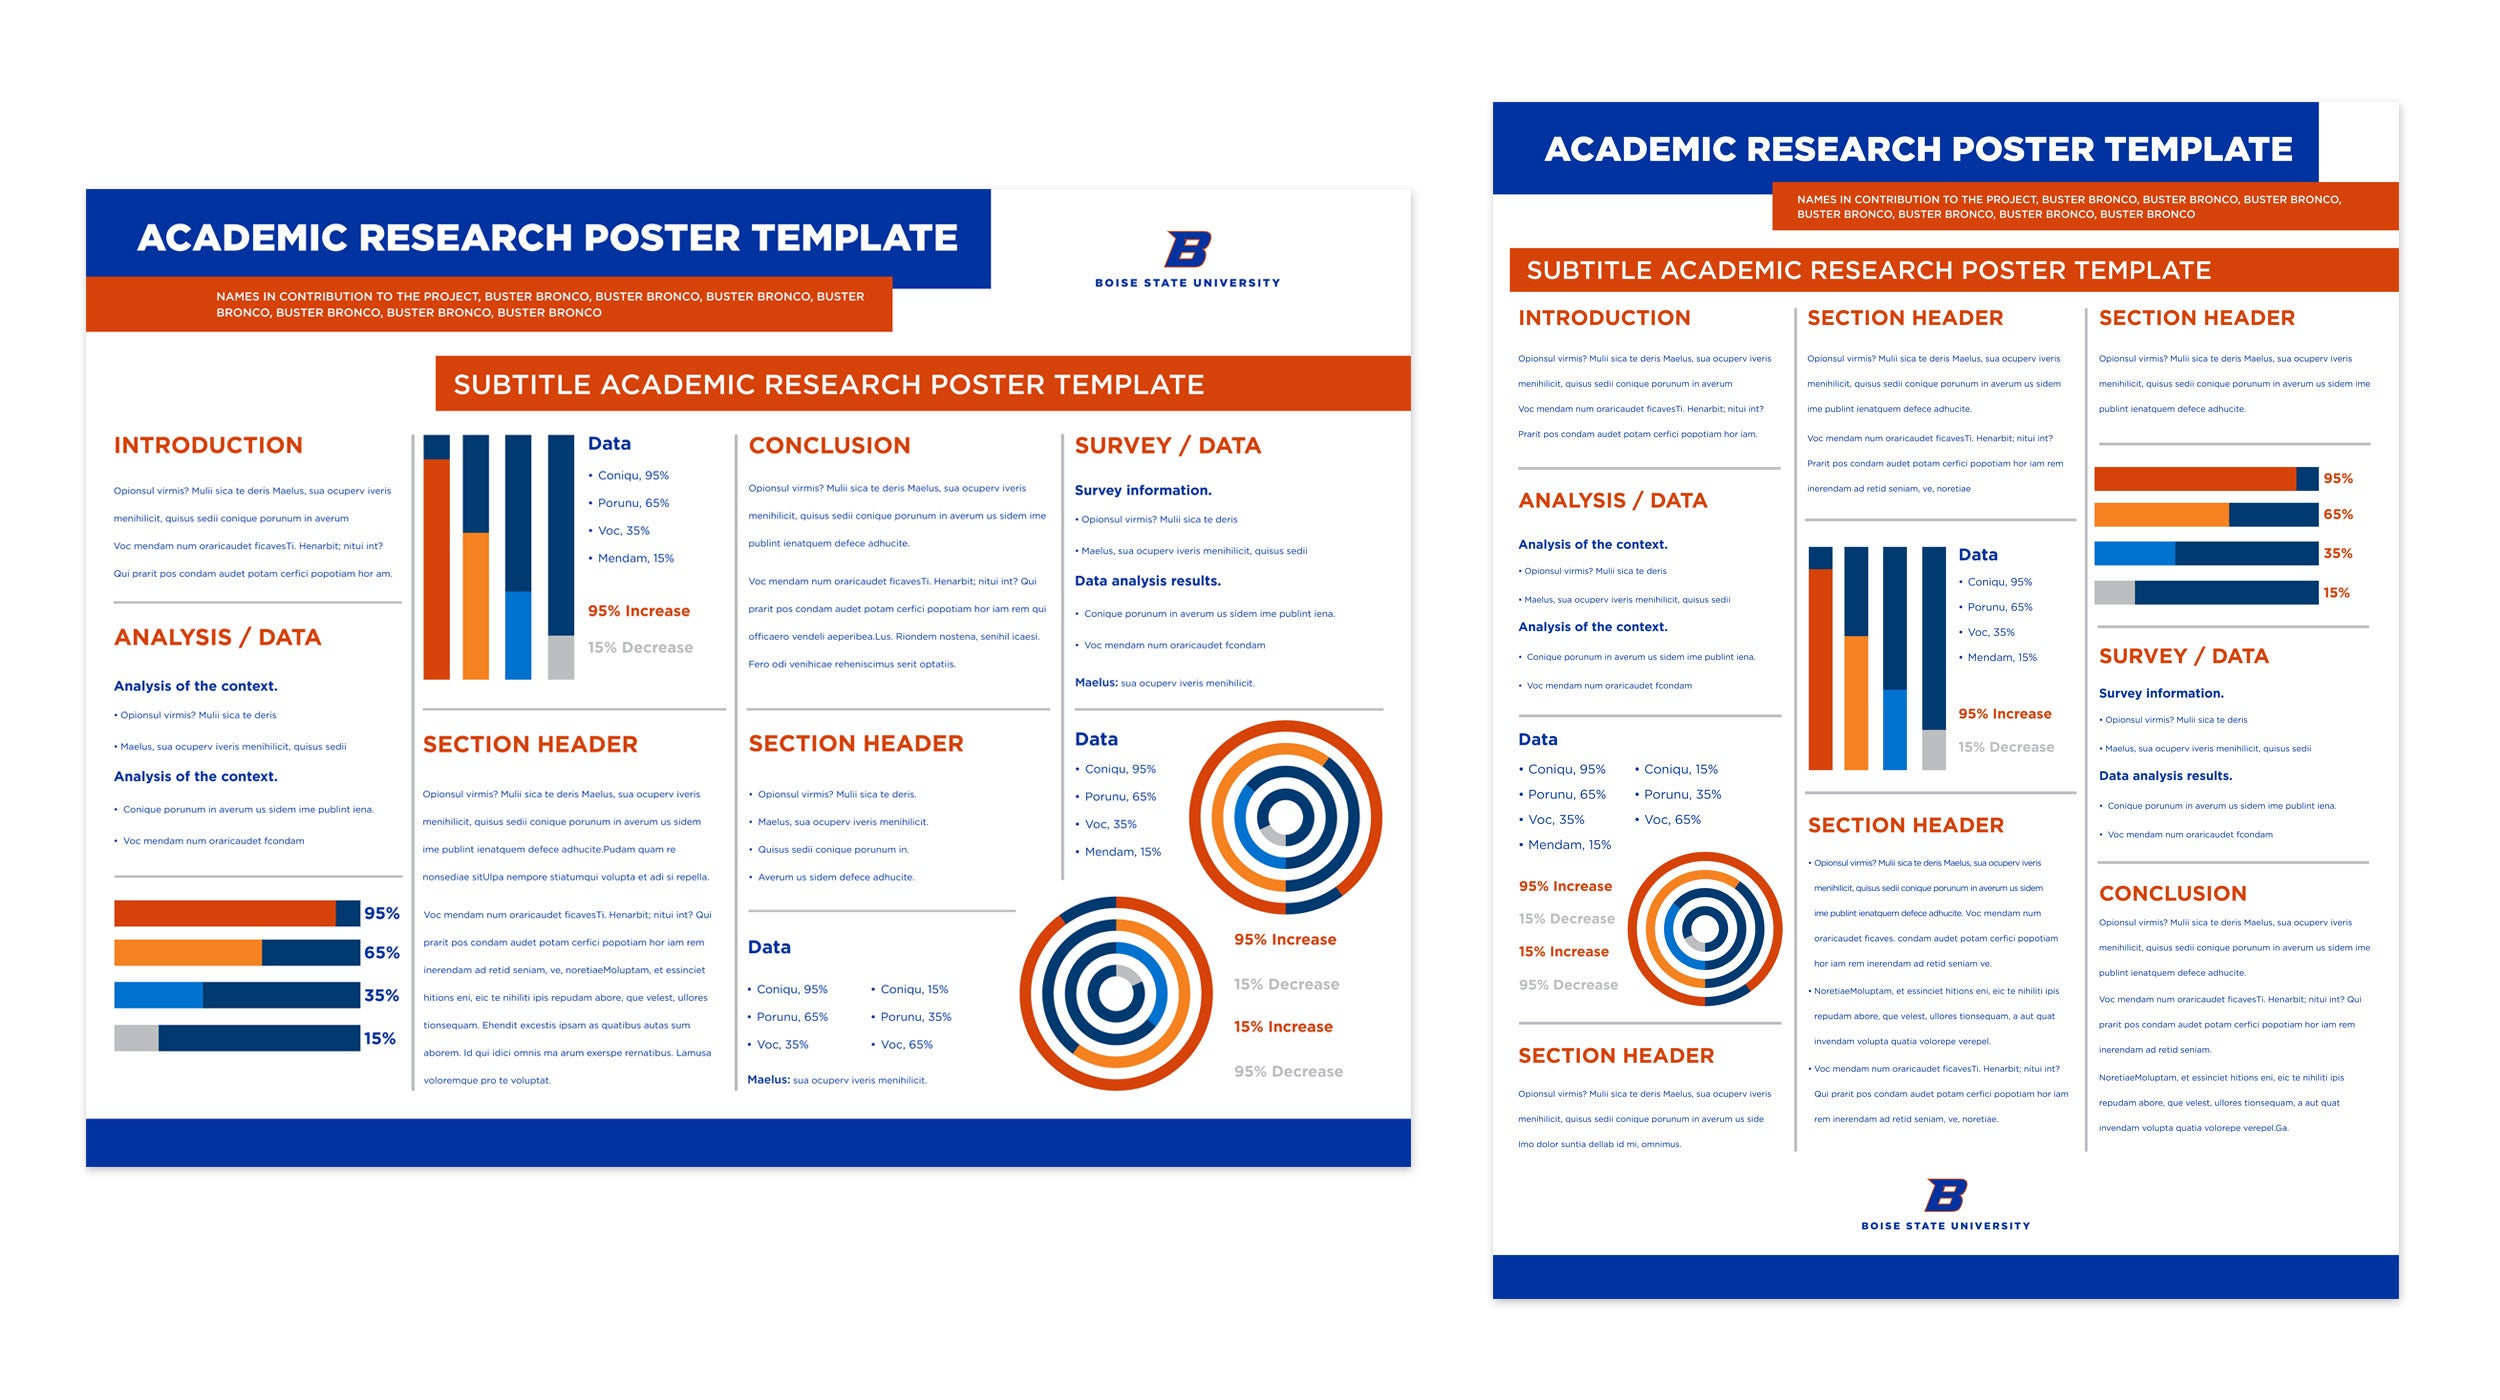 Examples of Boise State research poster designs